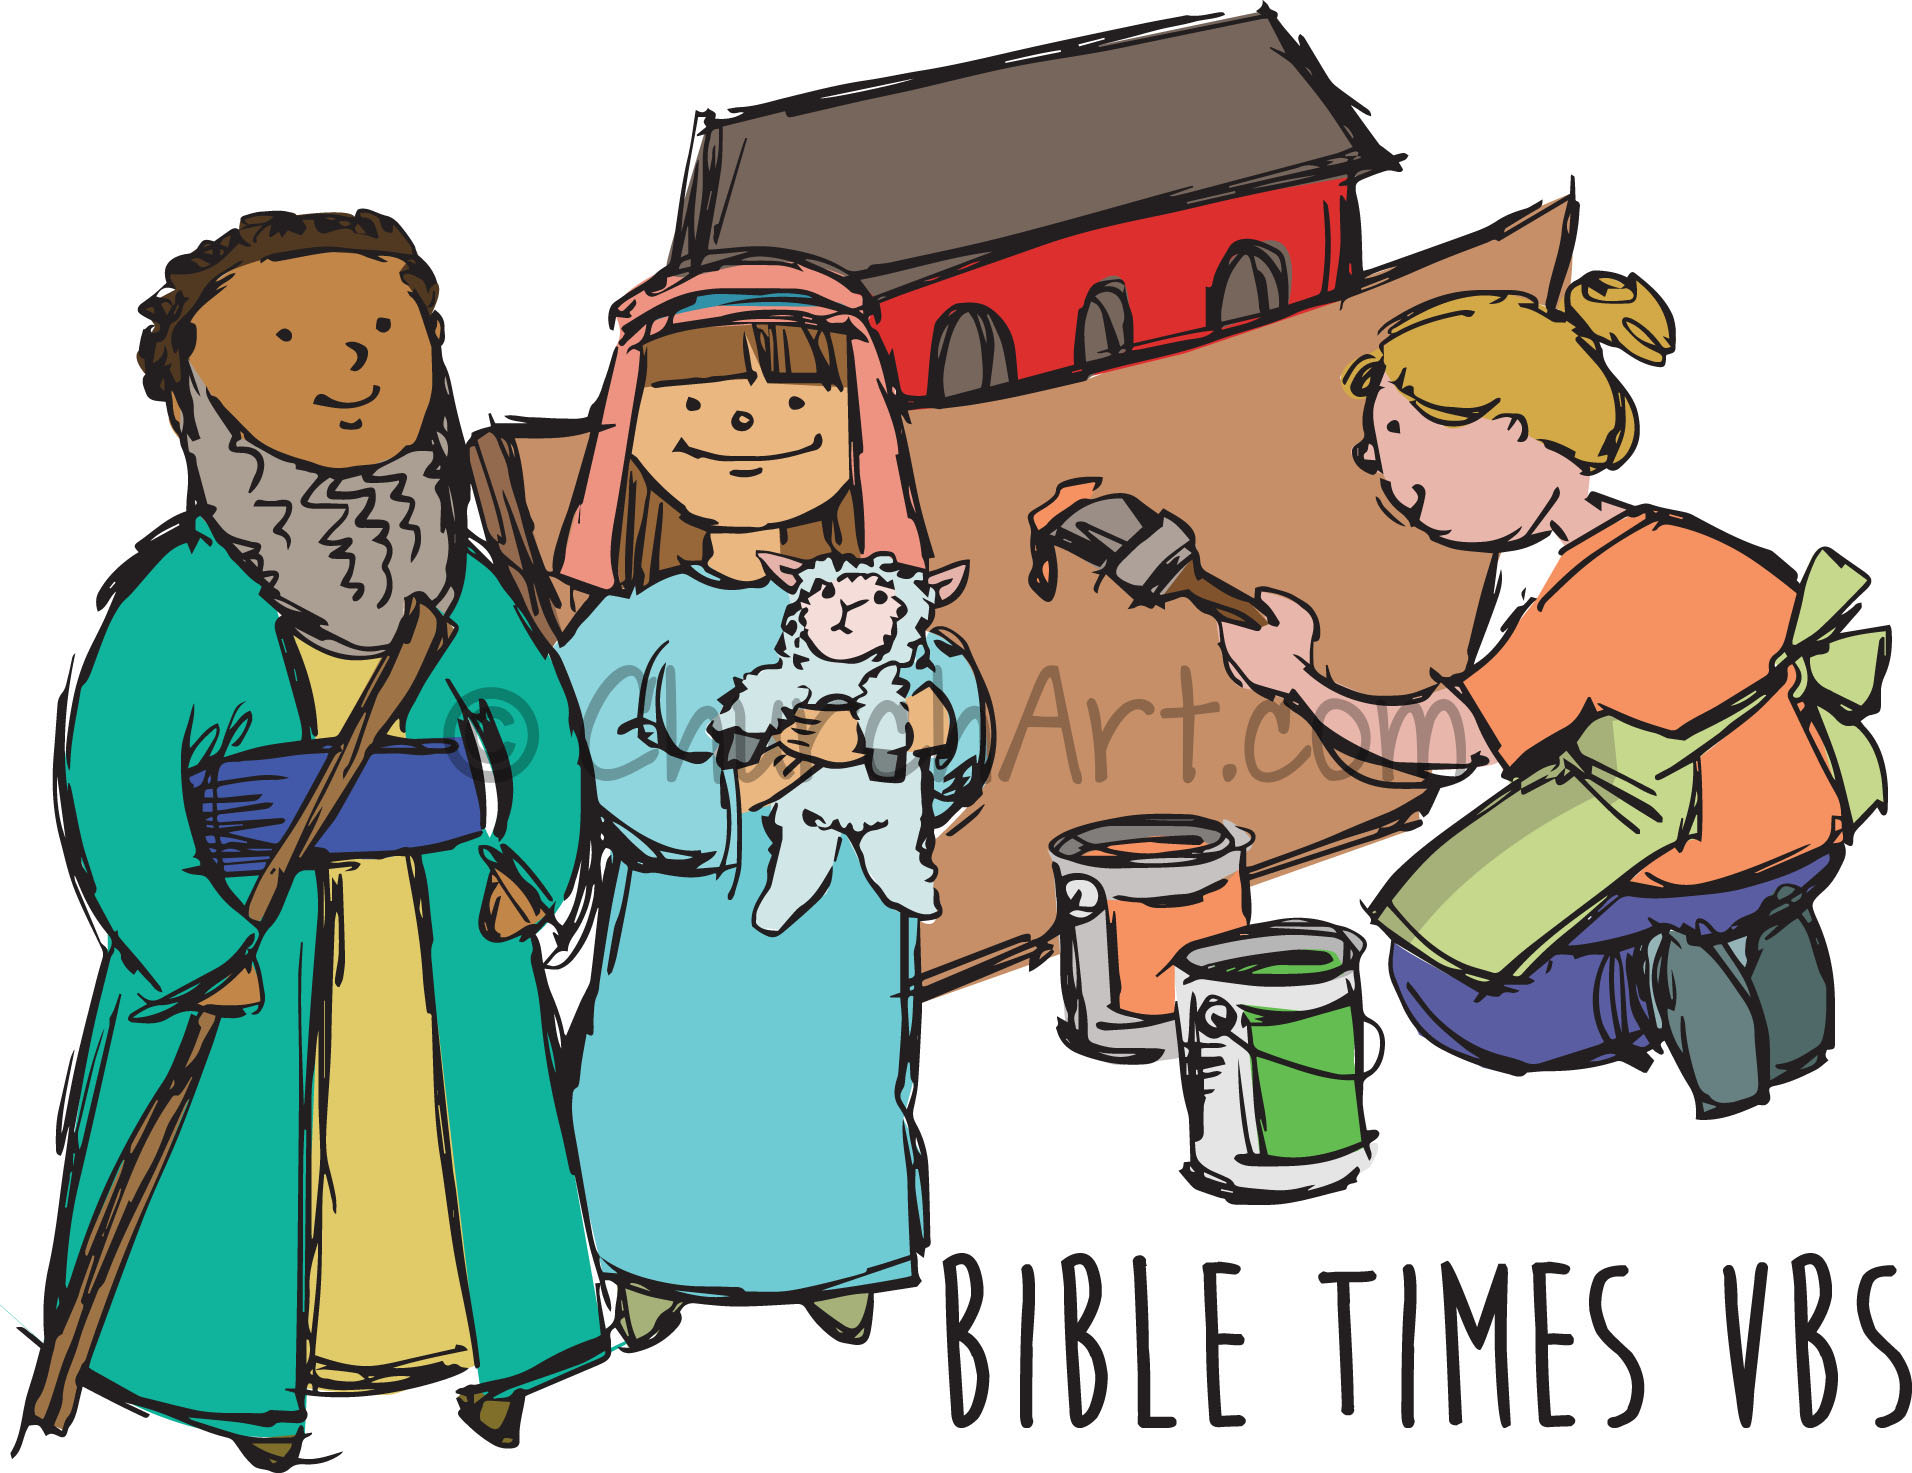 Clipart and images for all your vacation Bible school needs | ChurchArt ...